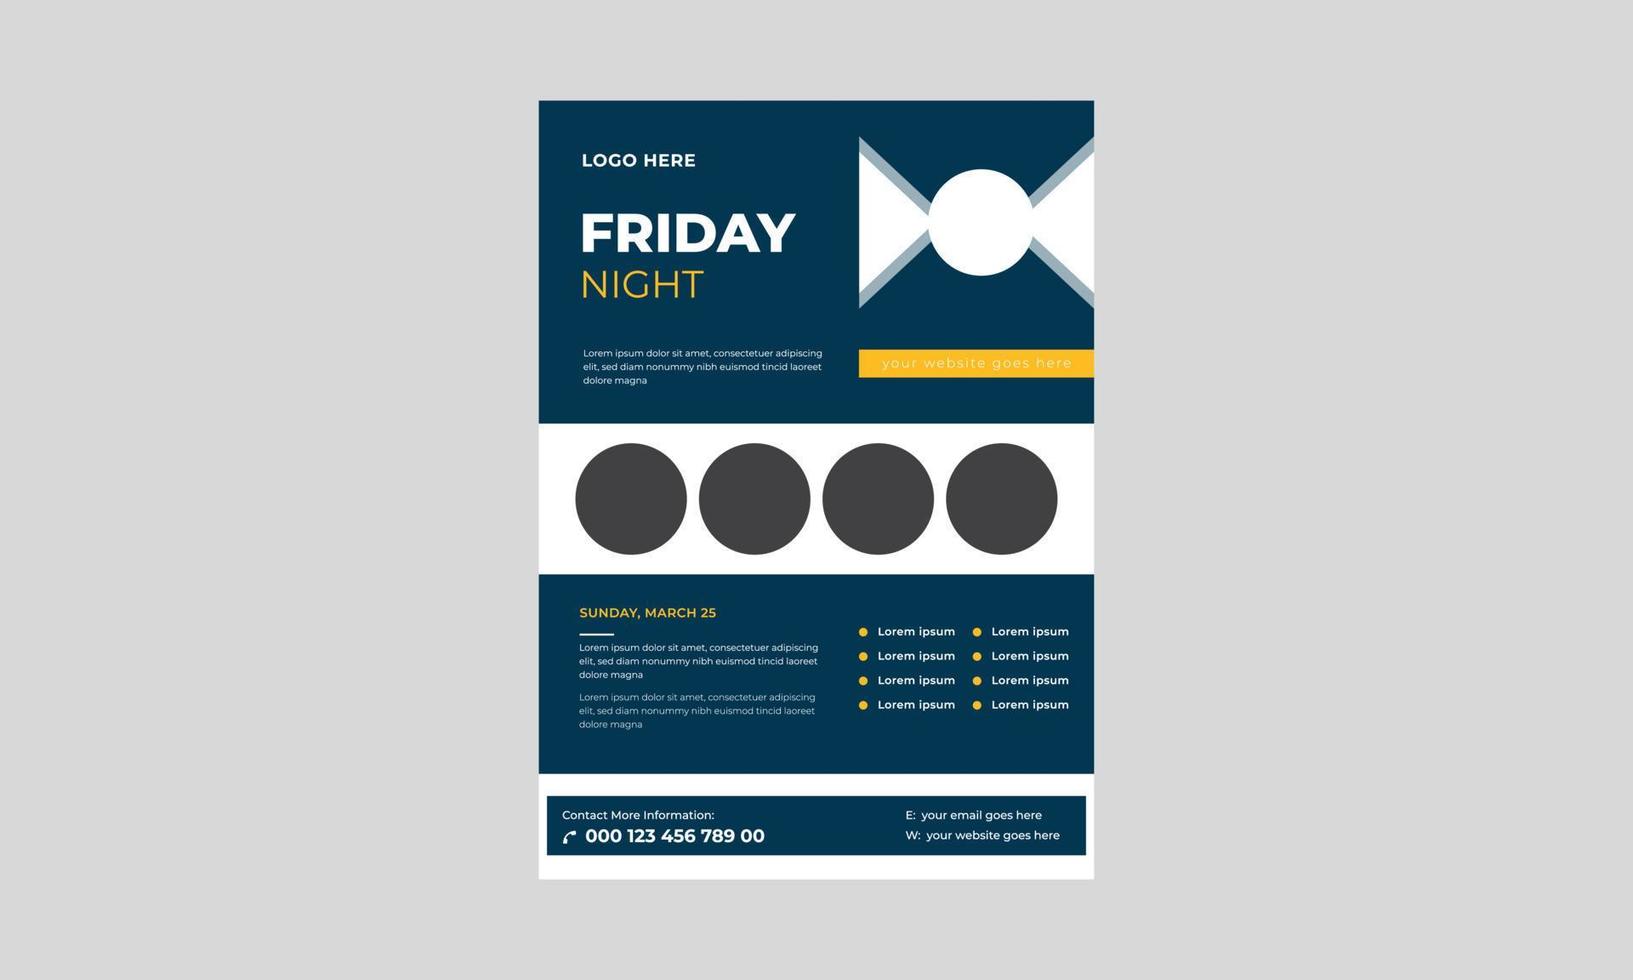 Friday vacations flyer template, Black Friday banner template, happy weekend word concept vector illustration with flyer.